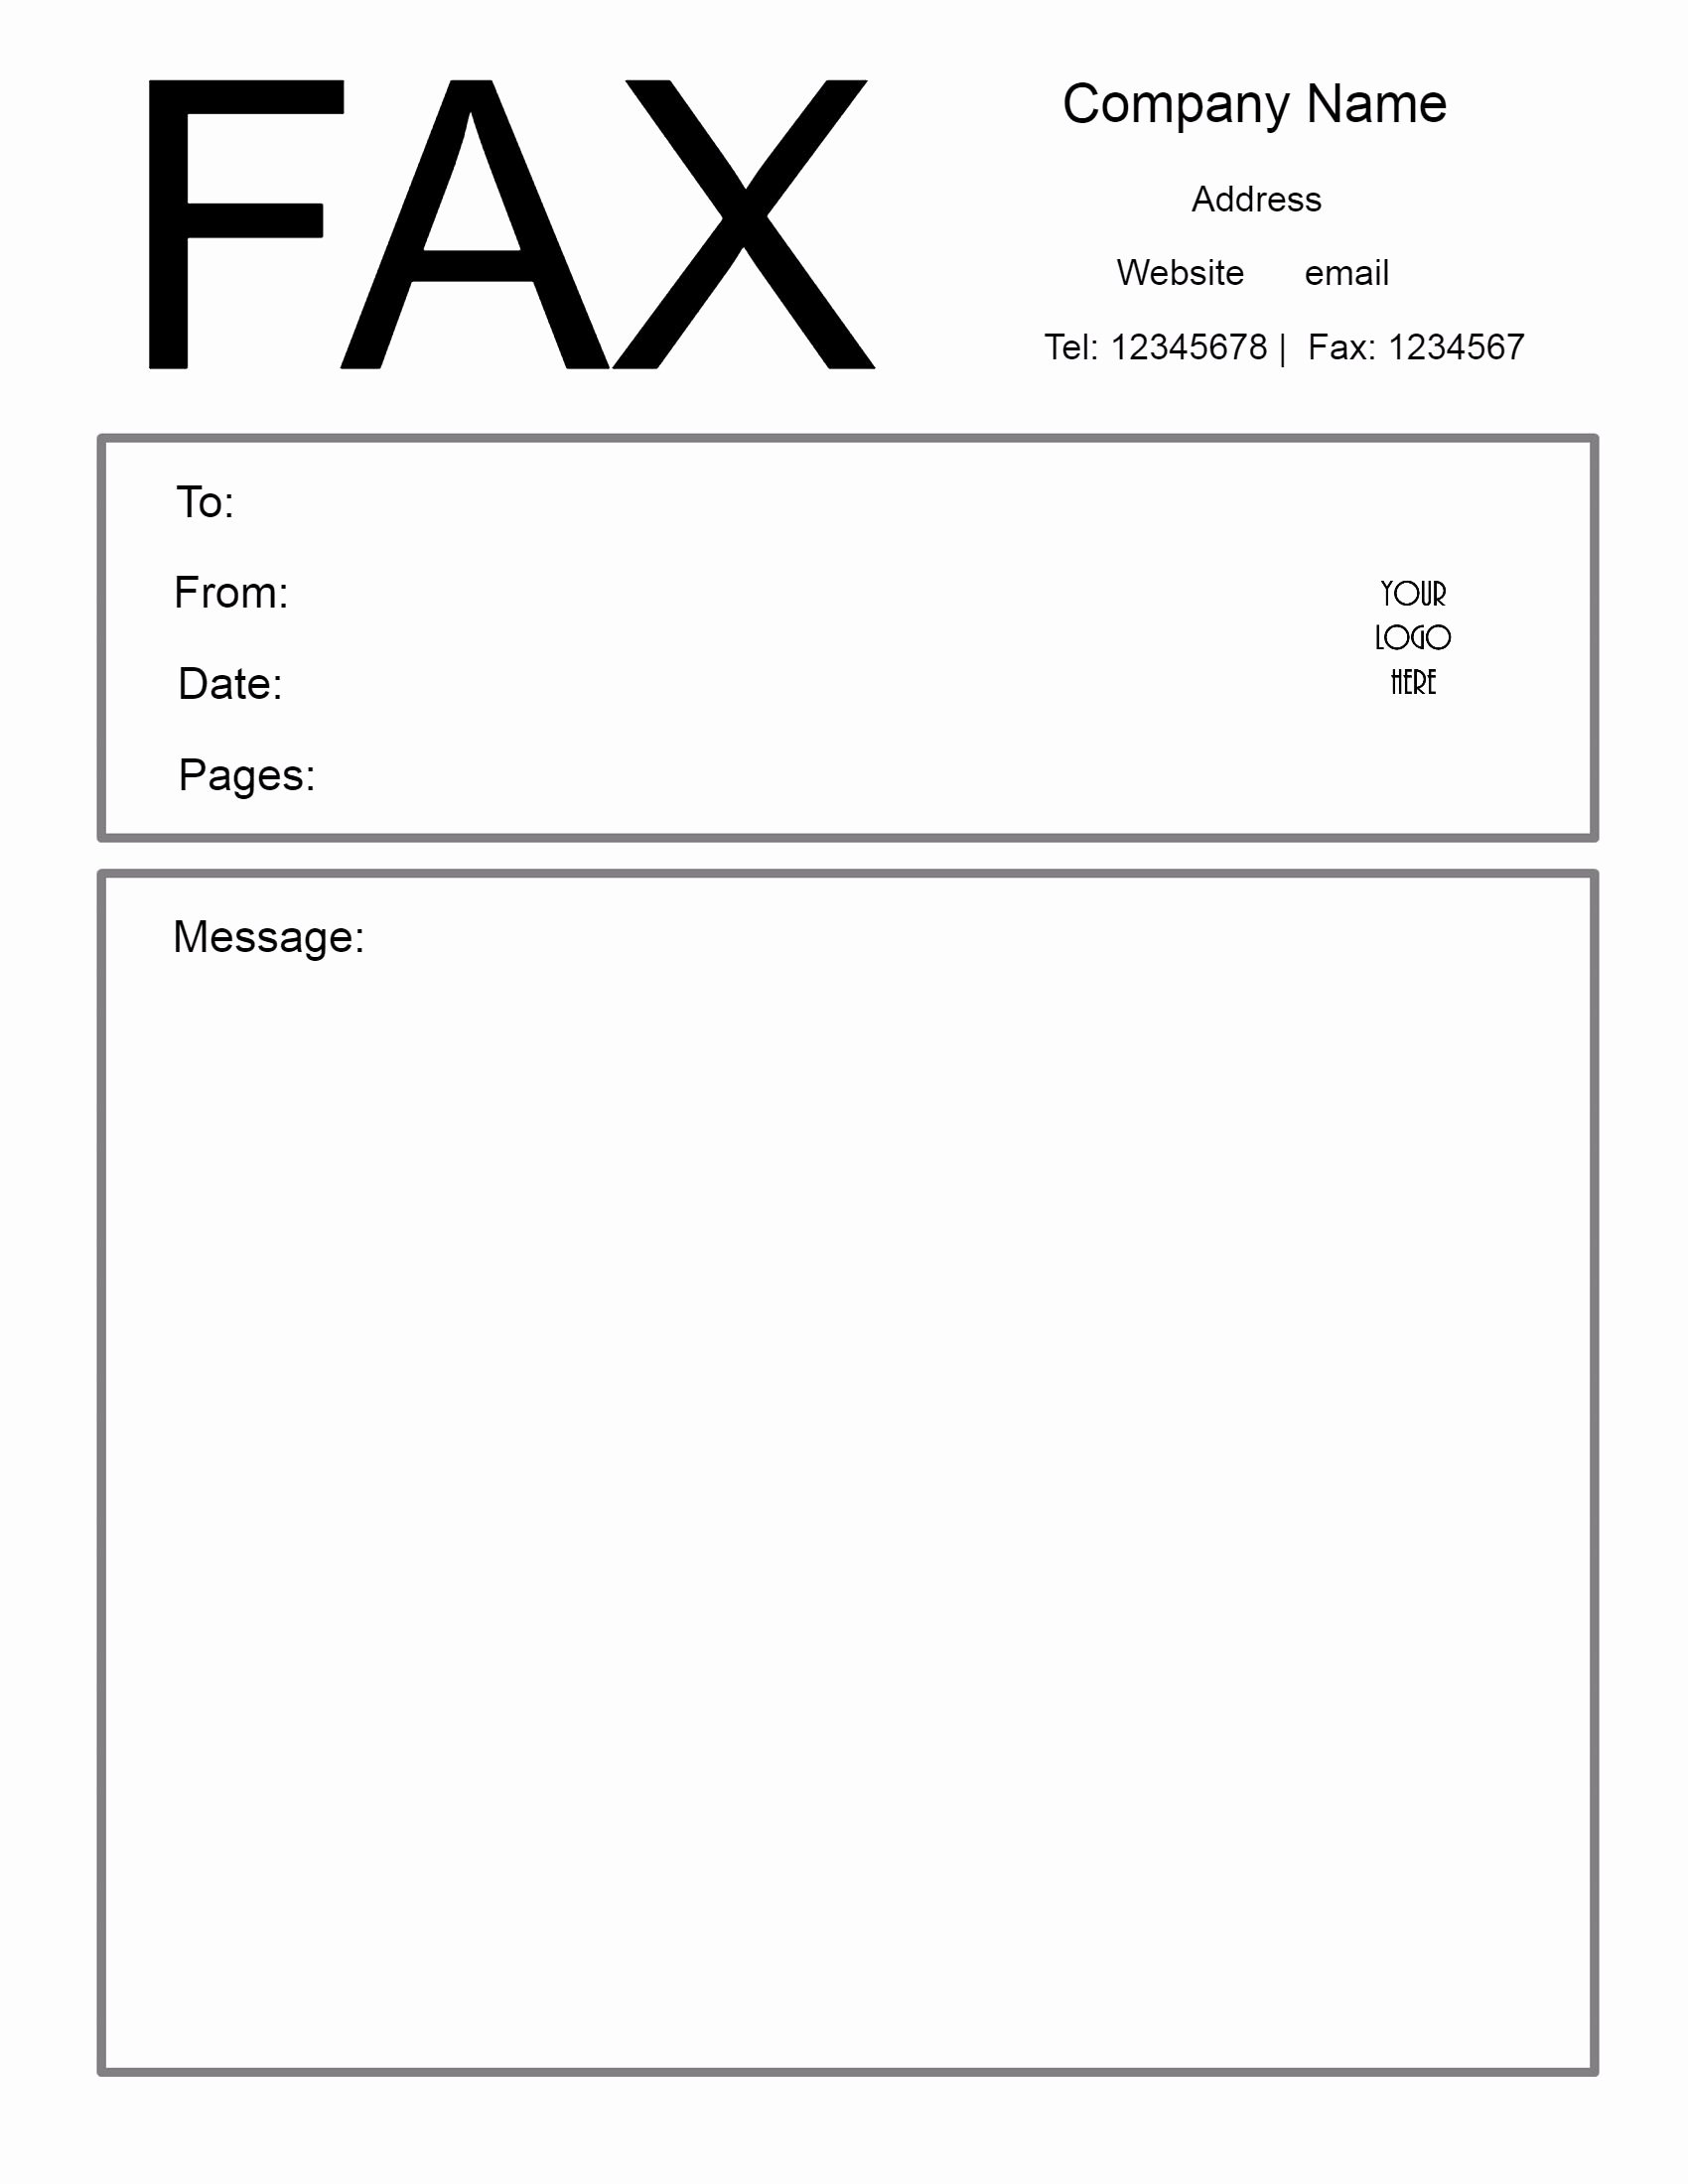 Fax Cover Sheet format Luxury Free Fax Cover Letter Template